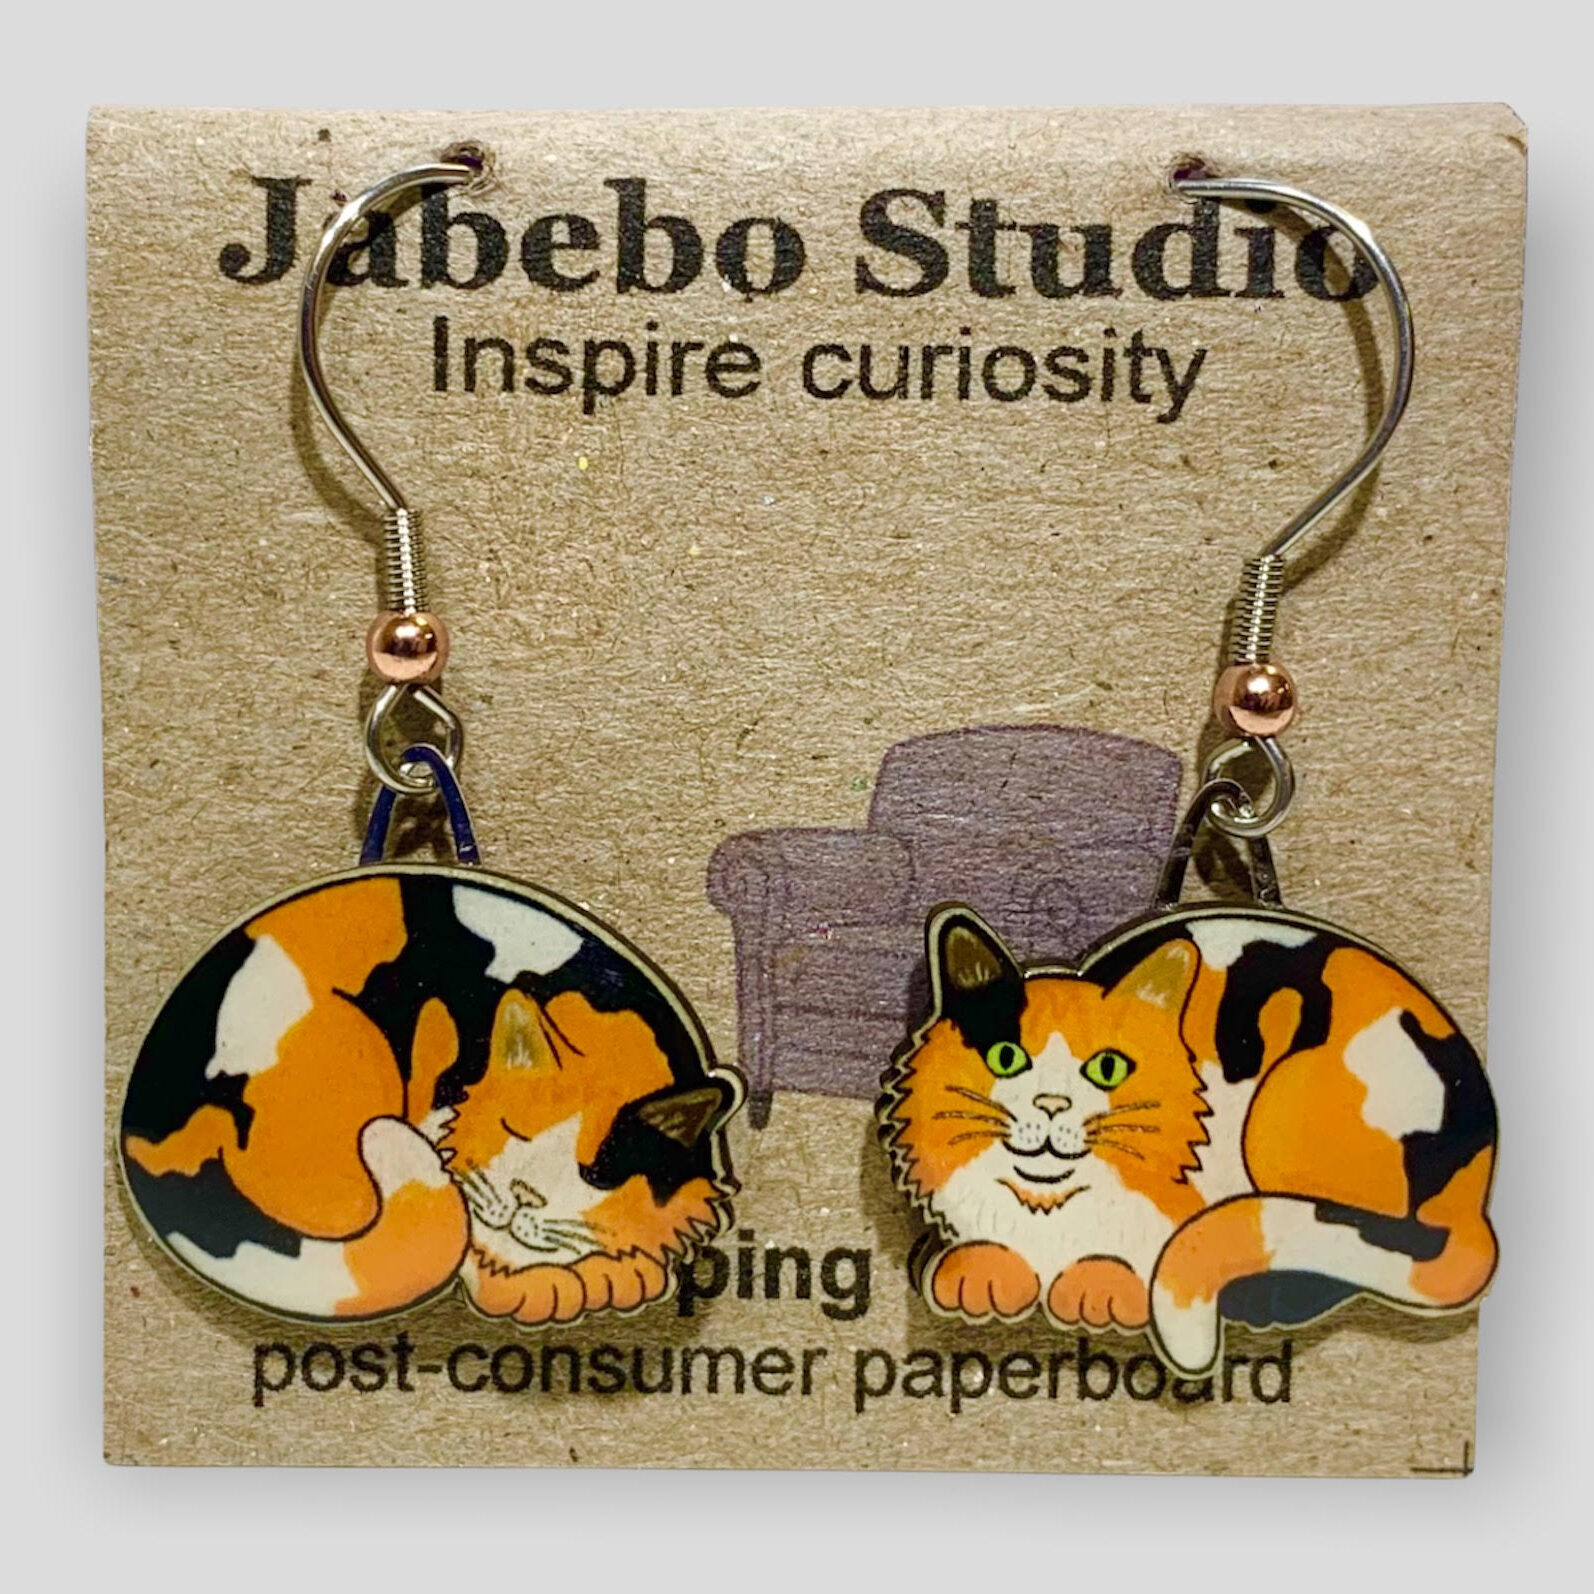 Picture shown is of 1 inch tall pair of earrings of the pet the Calico Napping Cat.